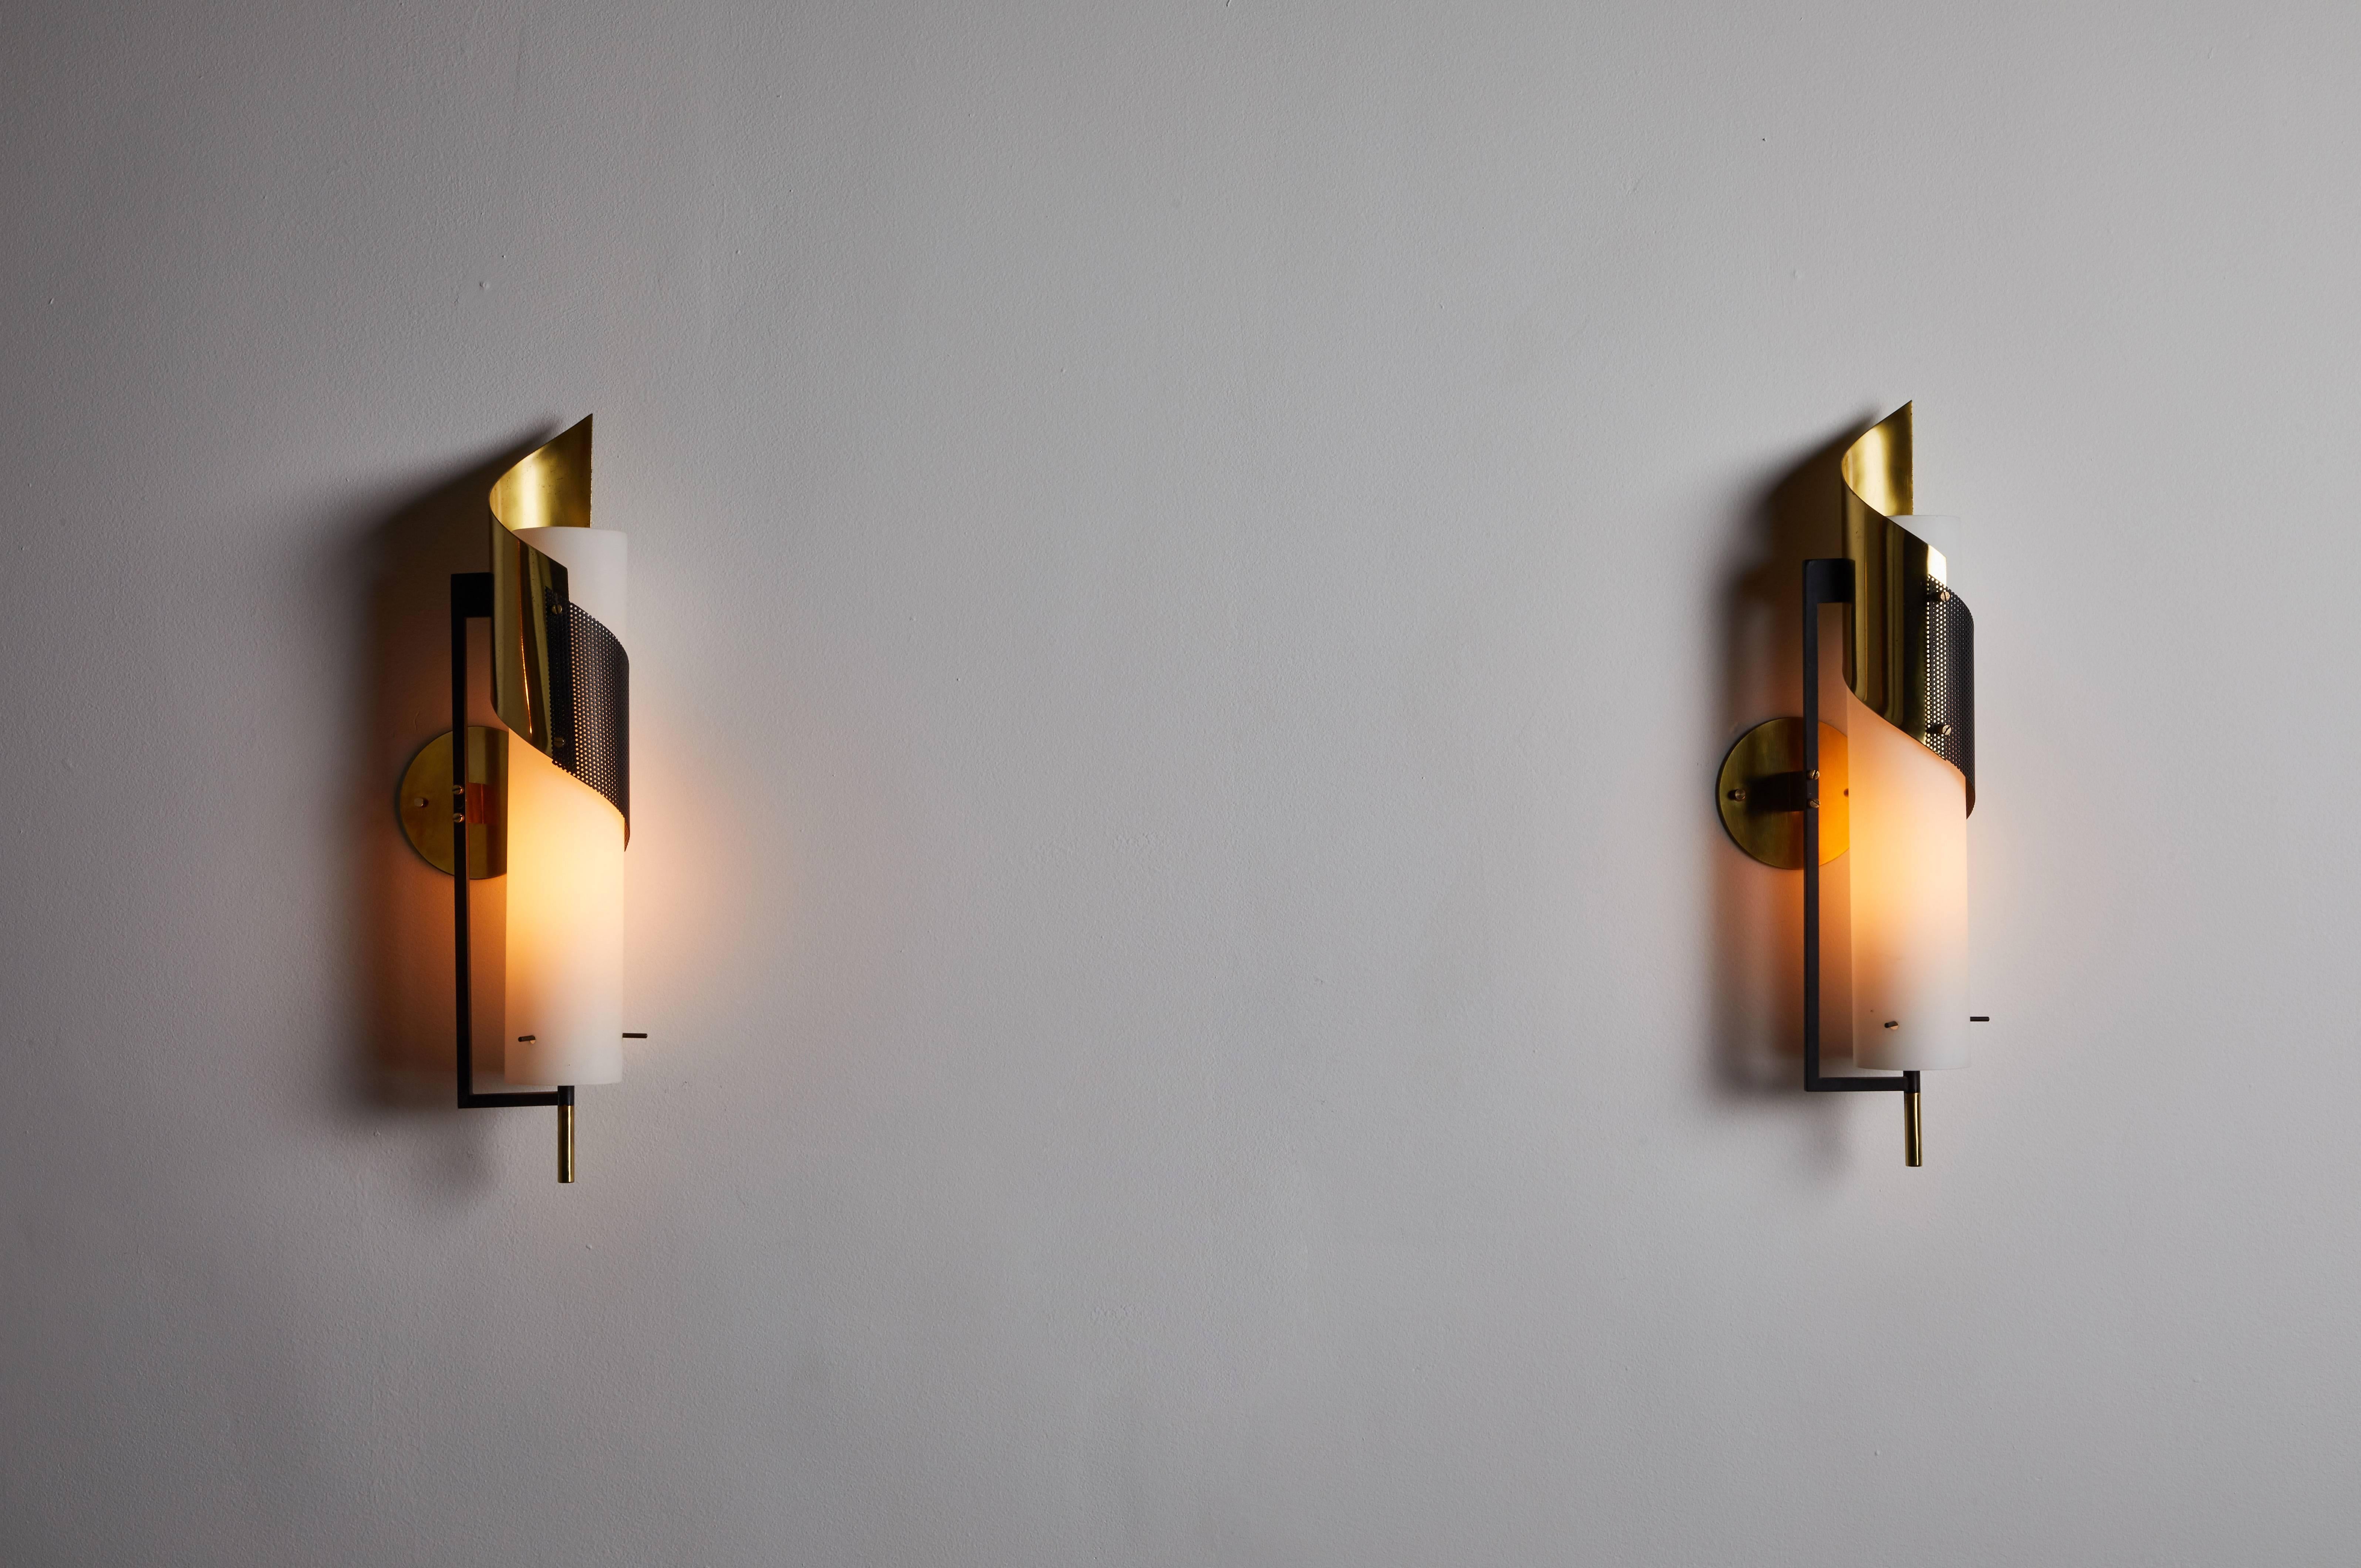 Pair of sconces by Stilnovo. Manufactured in Italy, circa 1960s. Brushed satin glass, enameled metal and brass. Rewire for US junction boxes. Custom brass backplates. Each sconces takes one E27 100w maximum bulb.